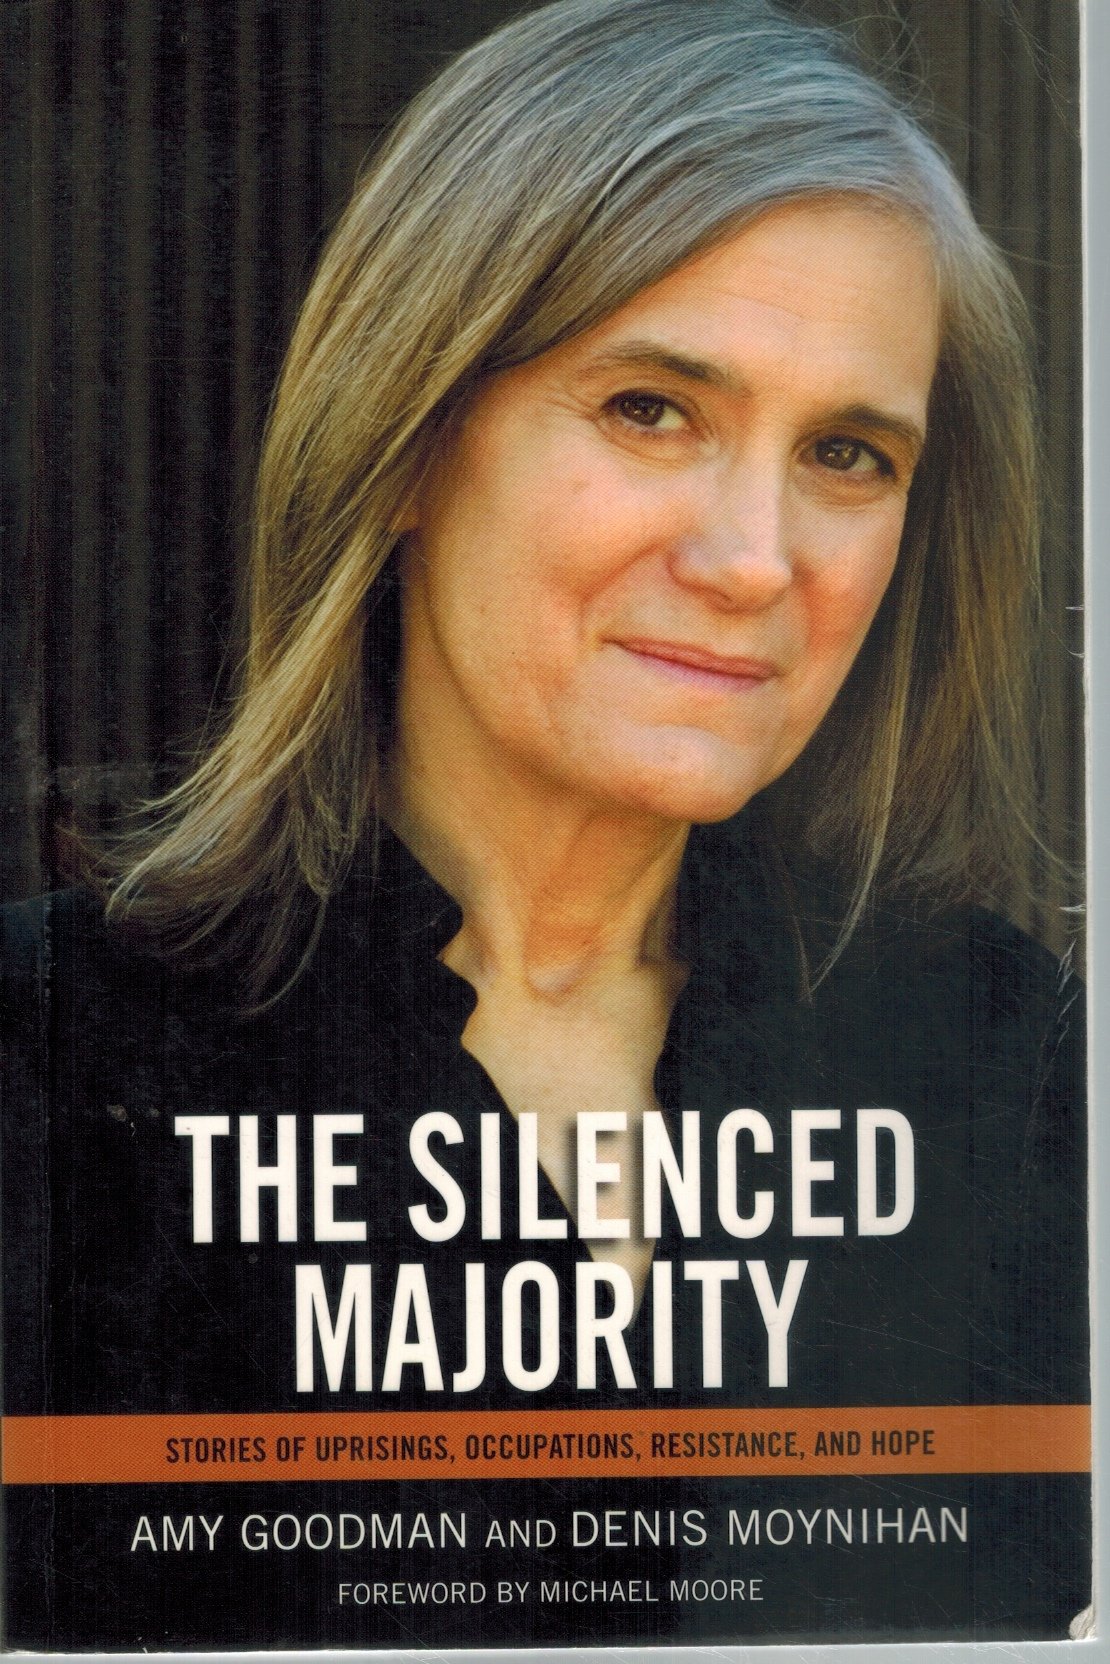 THE SILENCED MAJORITY Stories of Uprisings, Occupations, Resistance, and  Hope  by Goodman, Amy & Denis Moynihan